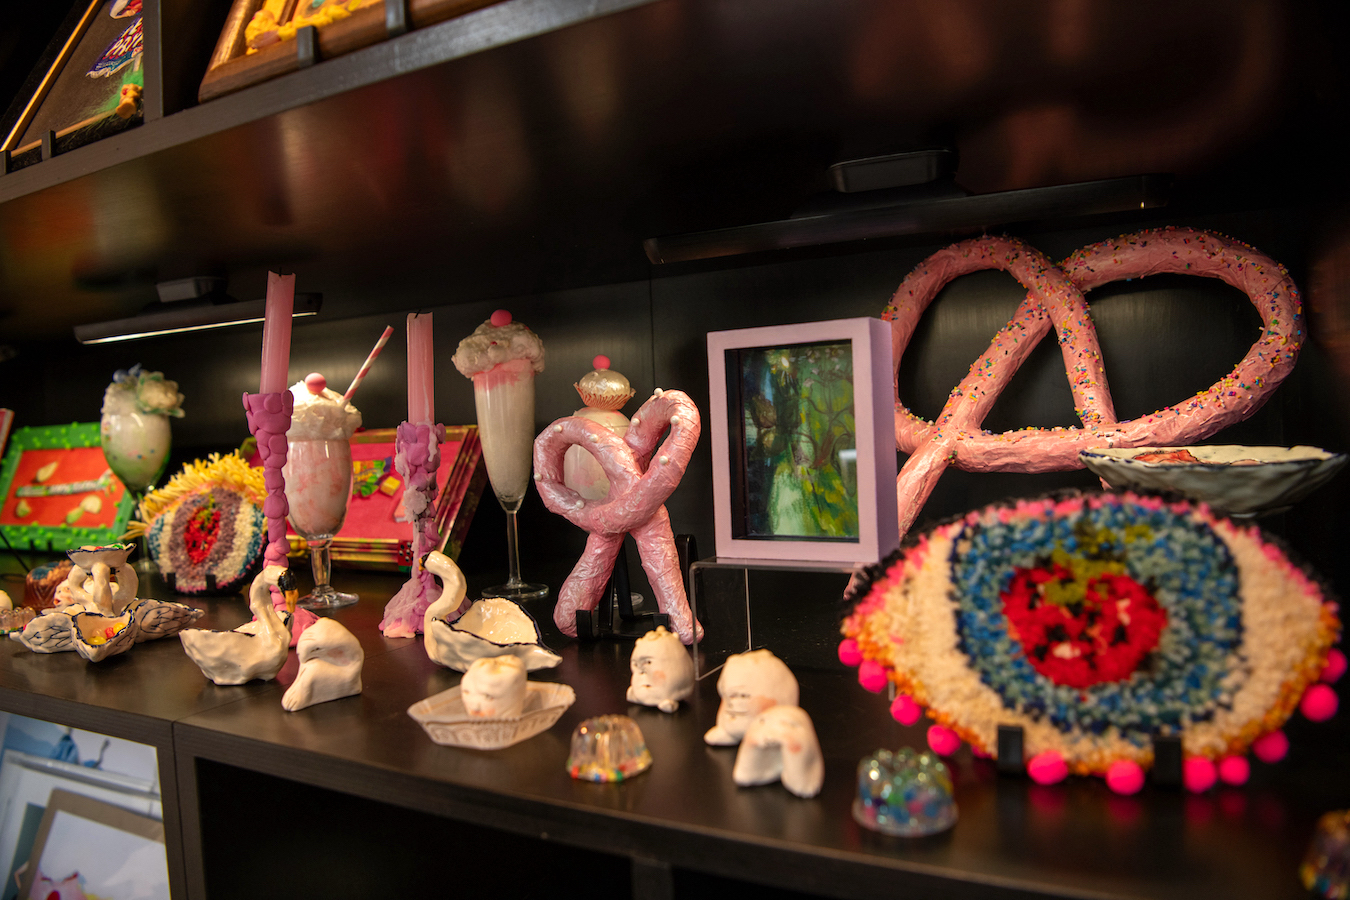 AMcE Creative Arts - The Candy Show, Install (credit Winnie Westergard)